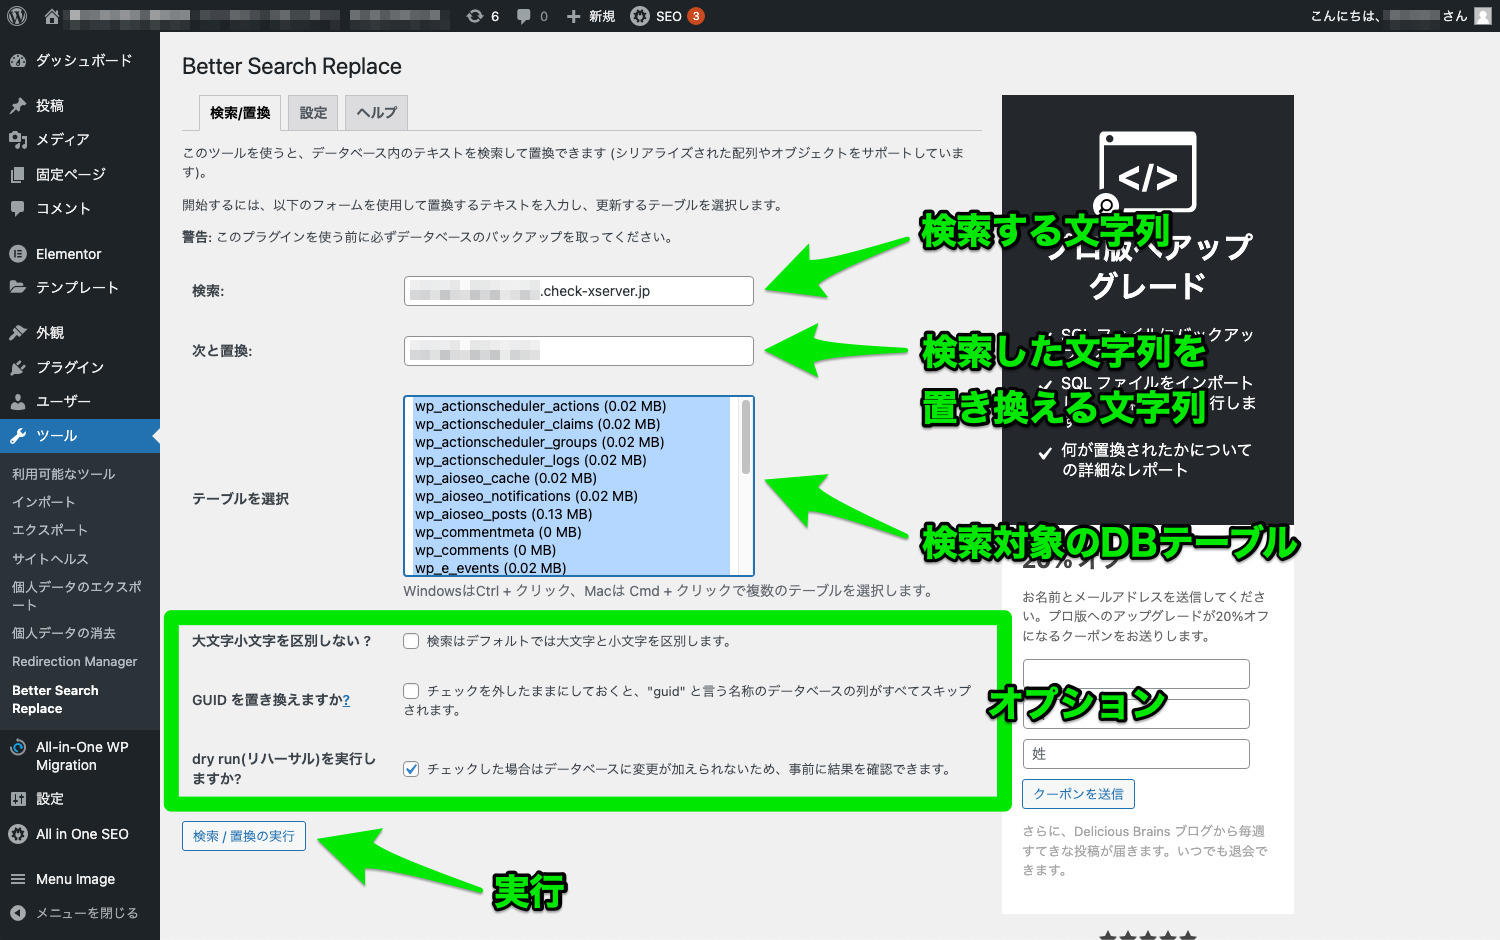 「Better Search Replace」の実行